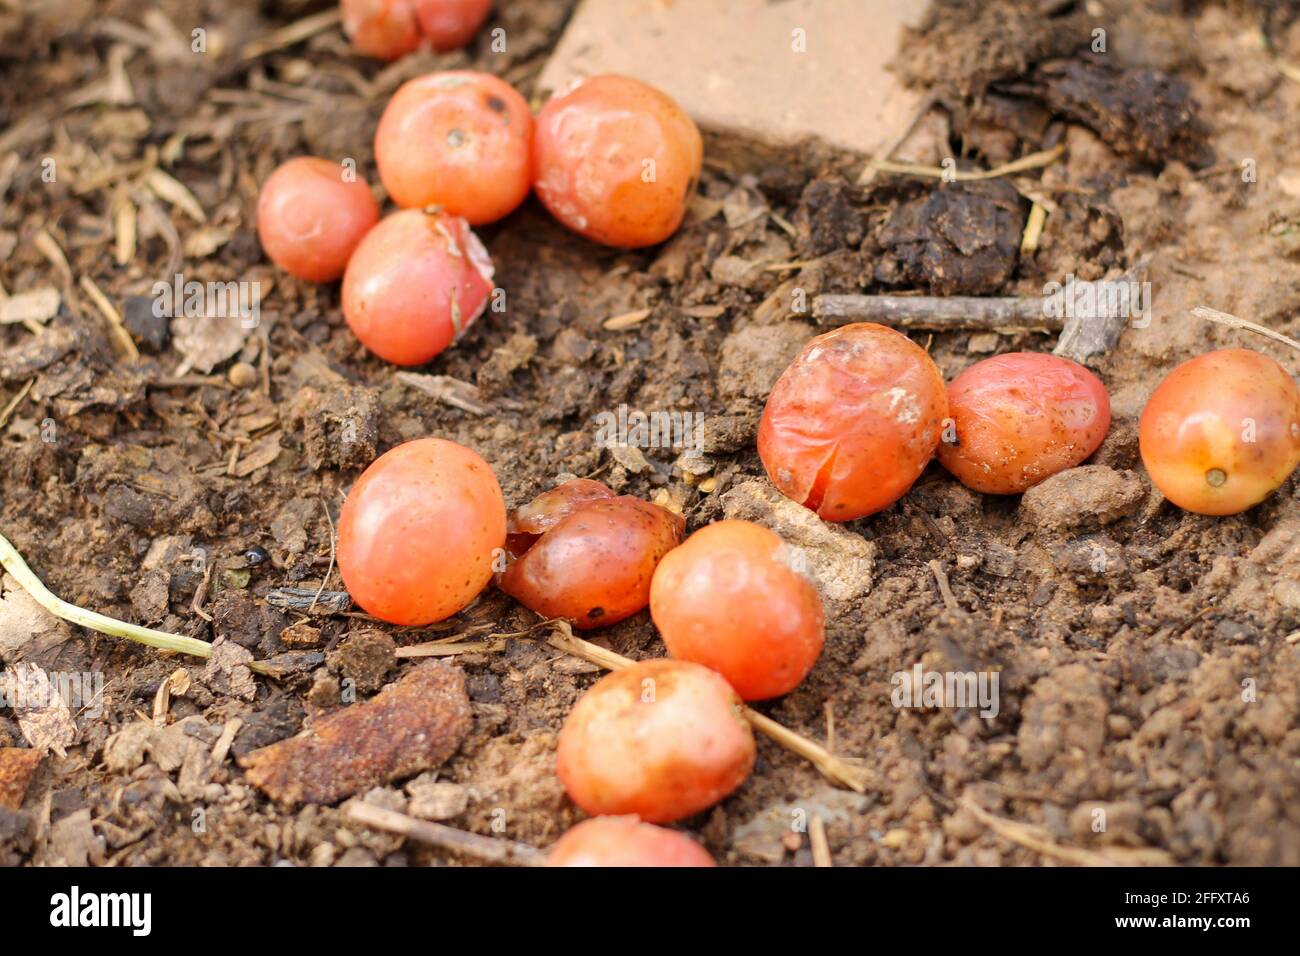 Rotten tomatoes are dropped into the ground in the garden to allow the seeds to germinate. Stock Photo